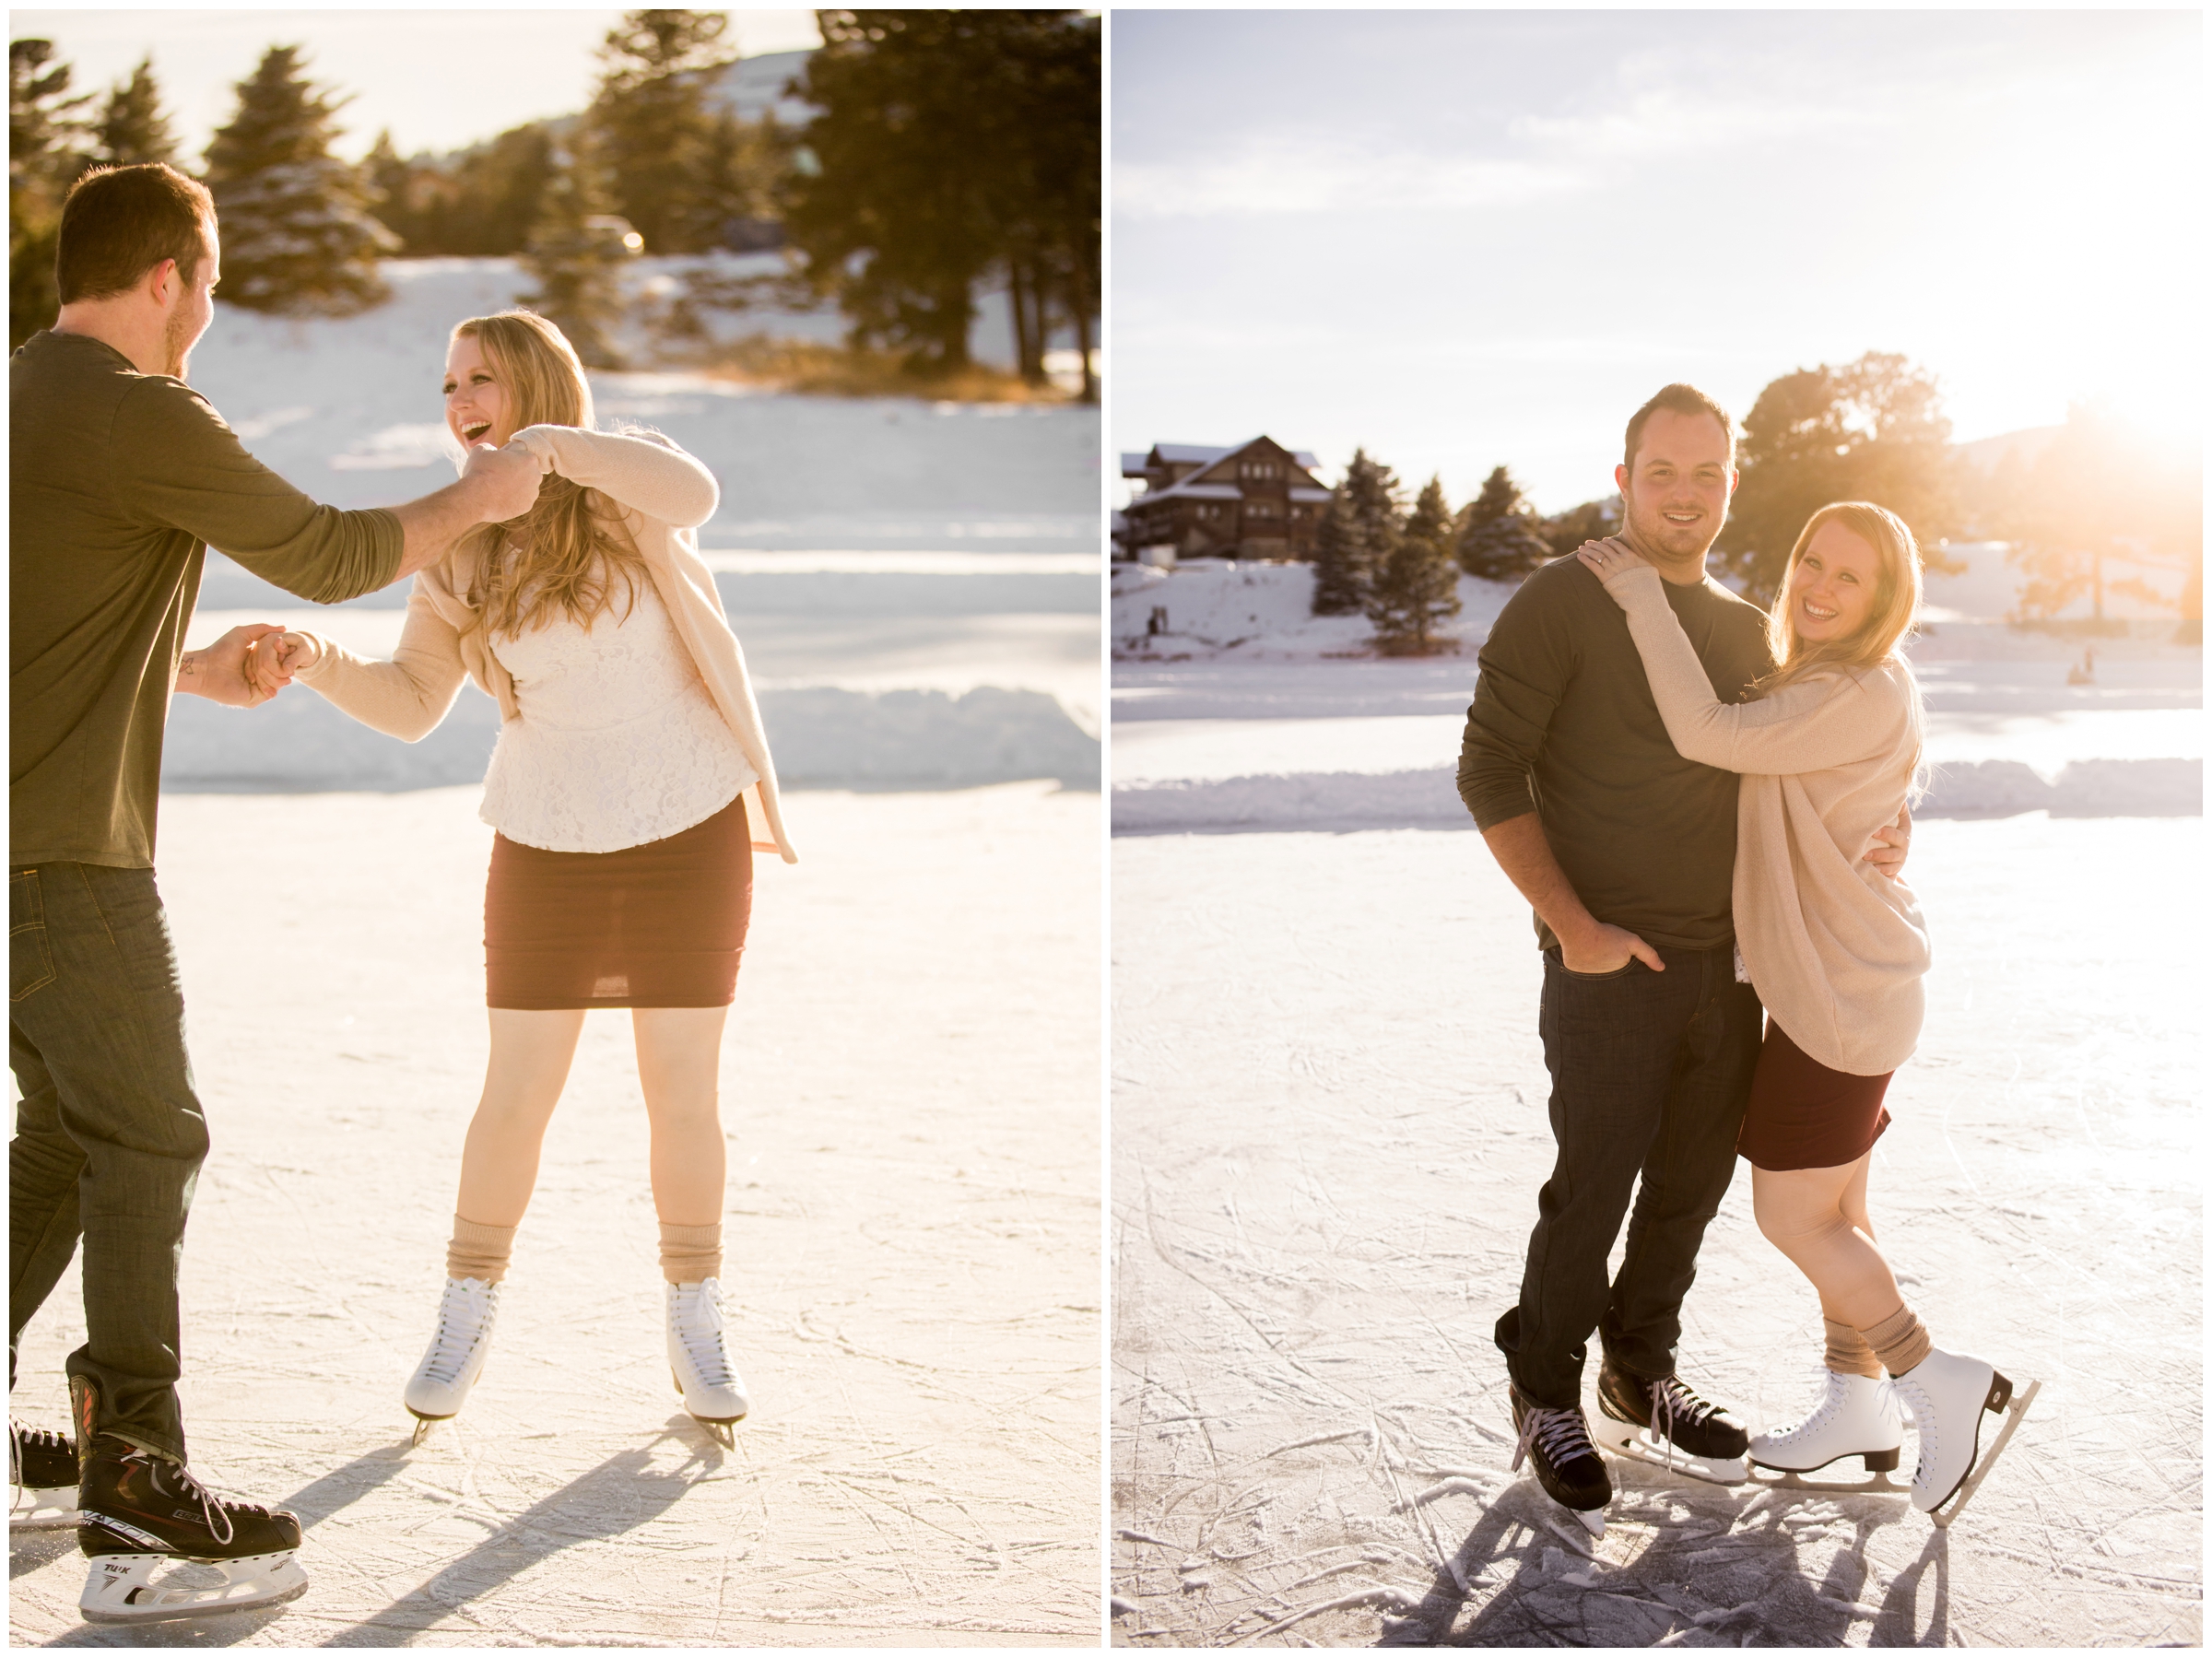 Ice skating engagement photos in the Colorado mountains by Evergreen photographer Plum Pretty Photography